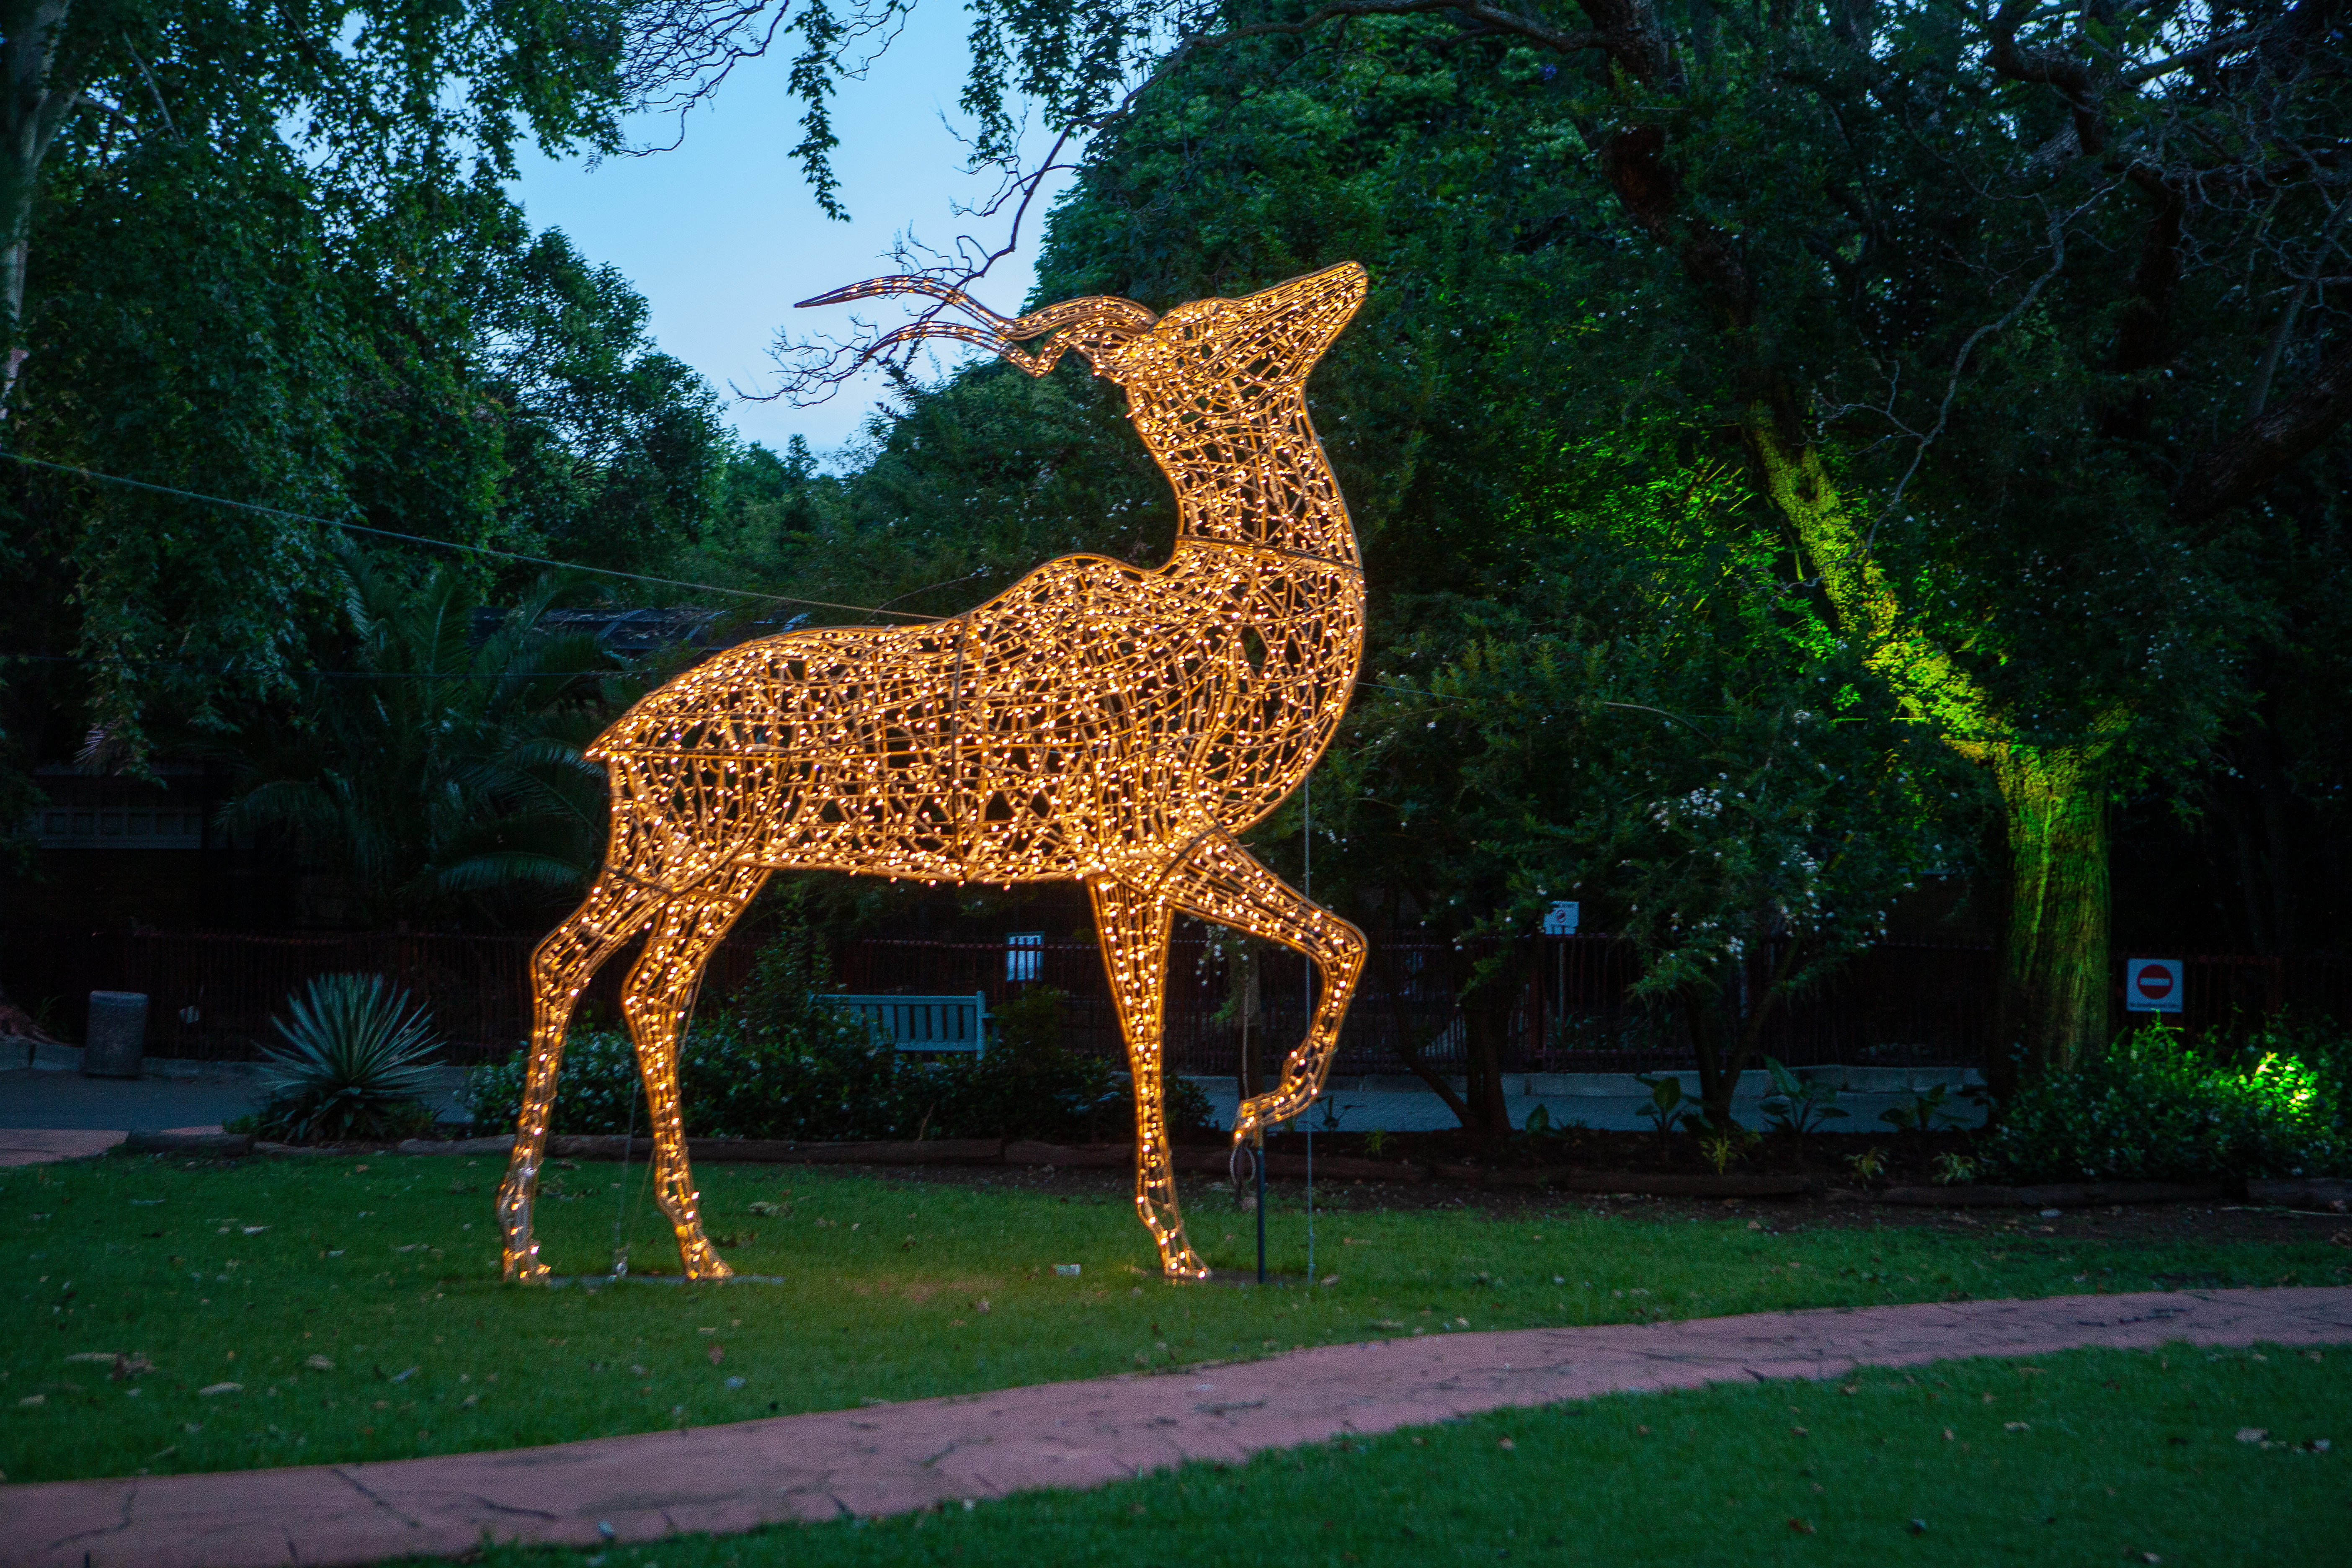 JOHANNESBURG, SOUTH AFRICA - DECEMBER 14: Magical Festival of Lights at the Joburg Zoo on December 14, 2021 in Johannesburg, South Africa. The Joburg Zoo hosted the event in partnership with the Joburg Theatre and City Power. (Photo by Gallo Images/Papi Morake)